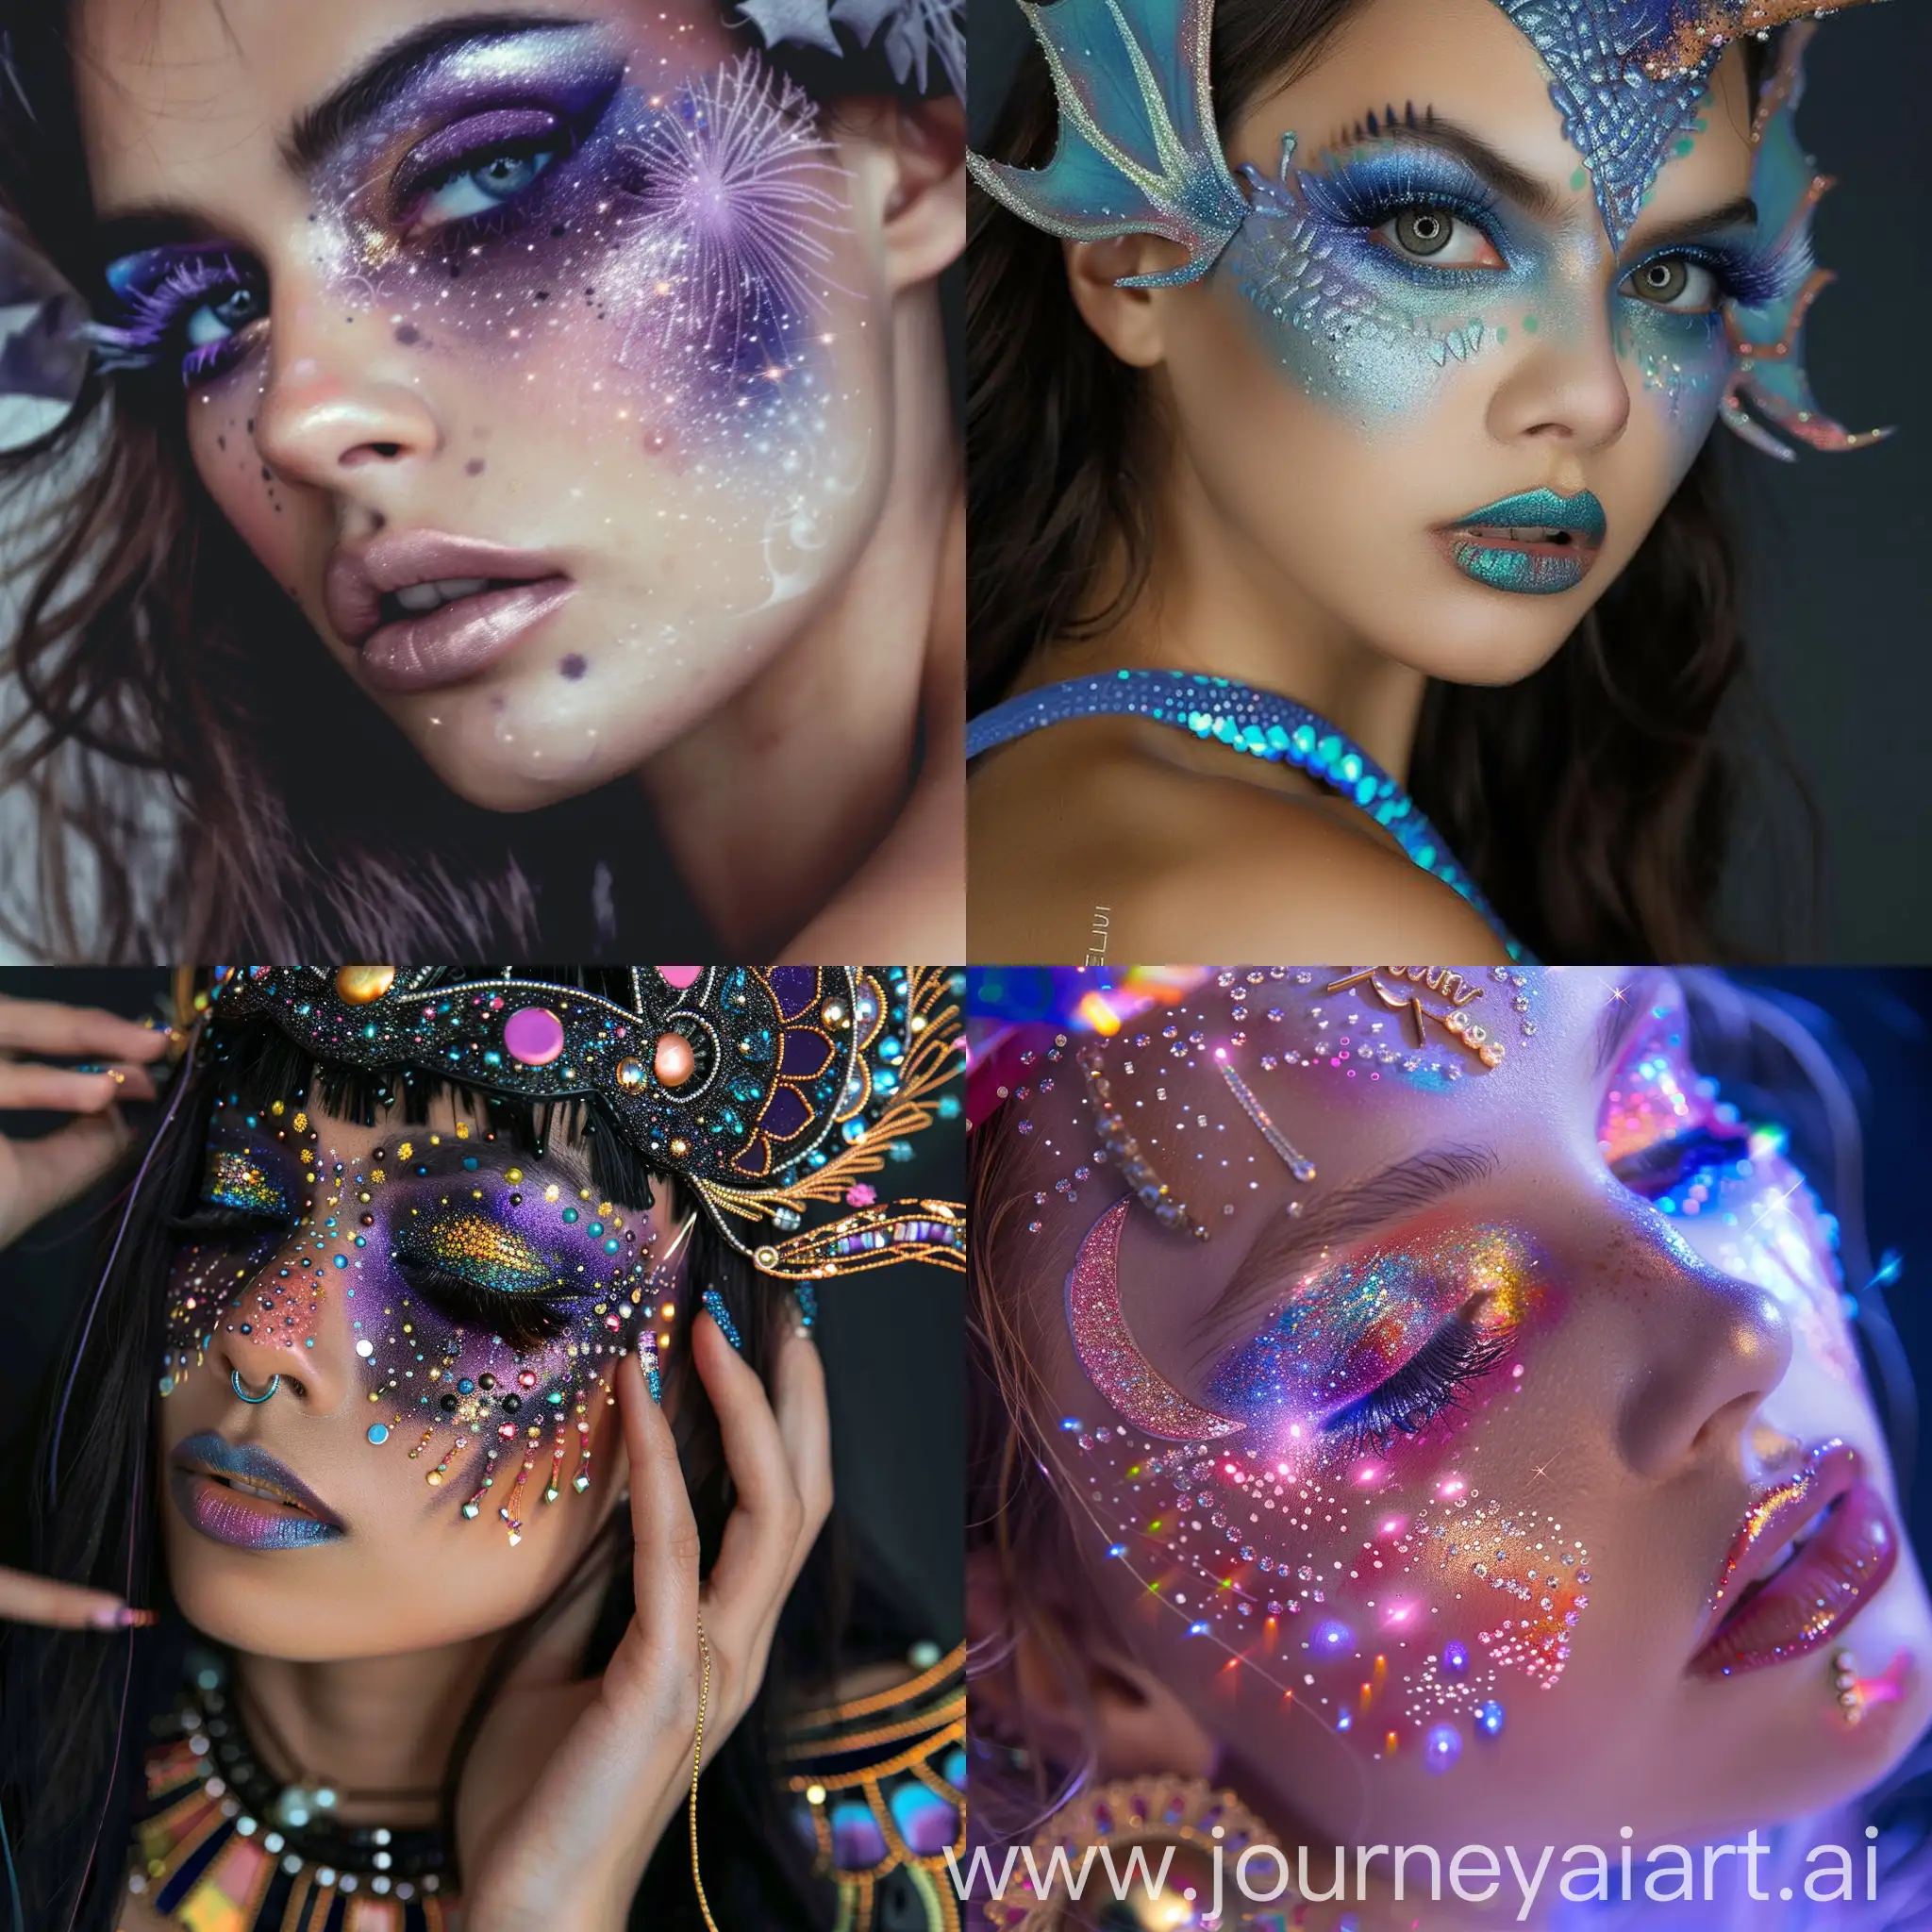 seluna is a company that is passionate about custom makeup